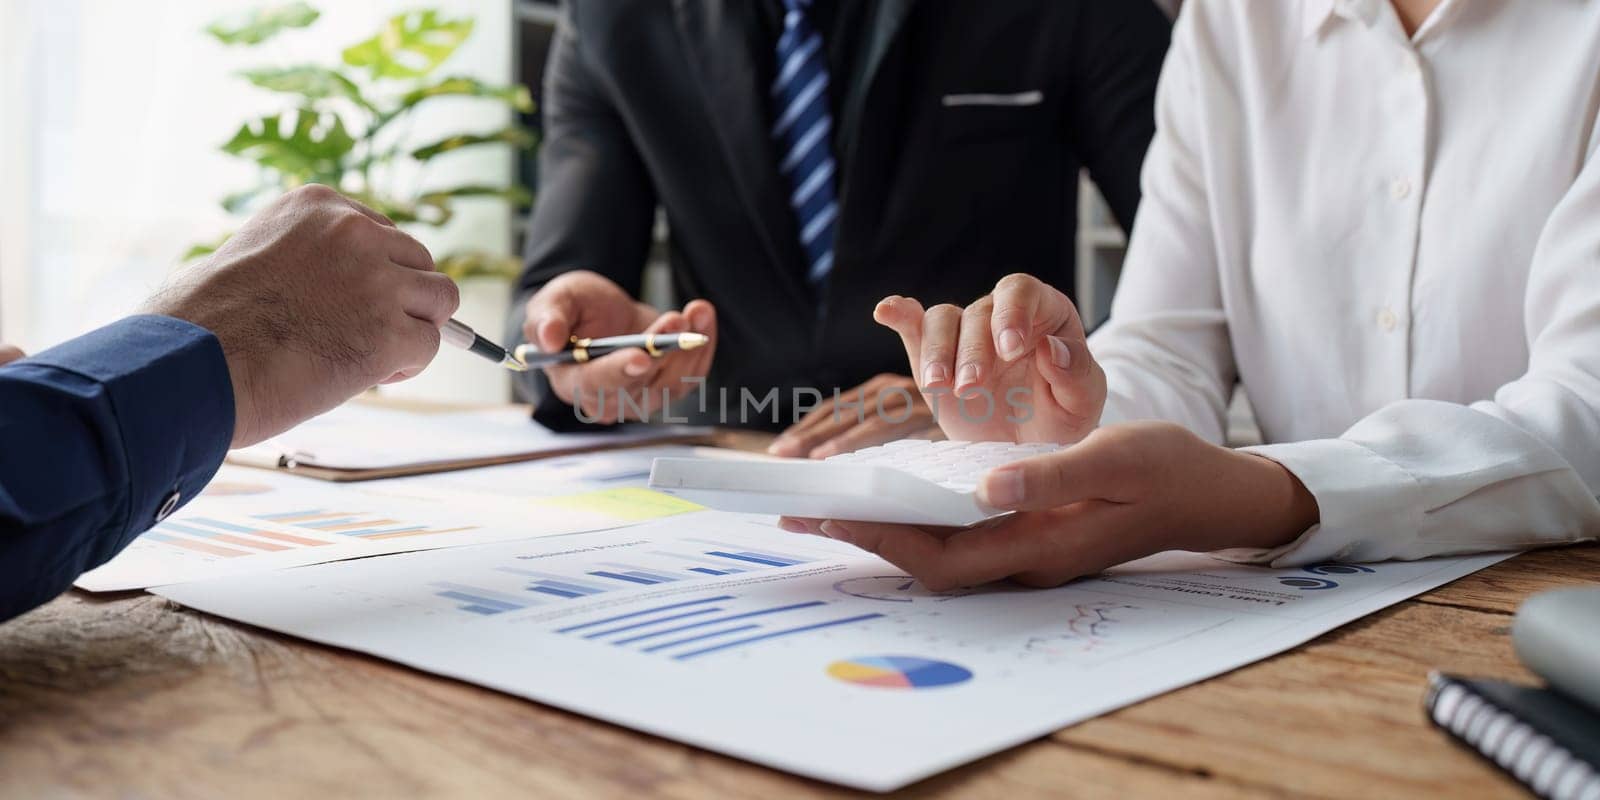 Group of Business People Meeting analysis financial plan, discussion, research with paperwork at office, accounting concept.